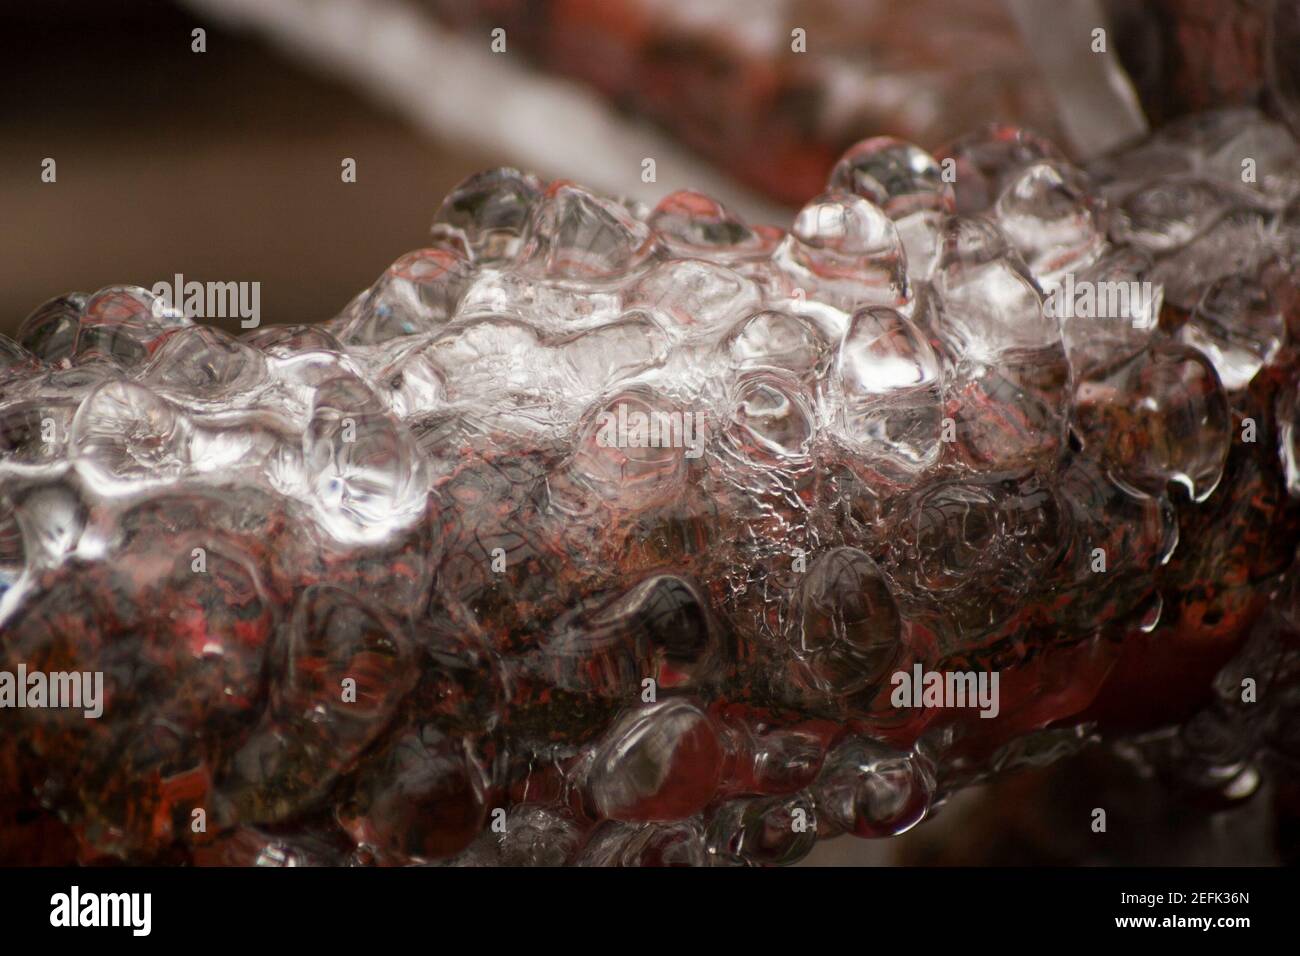 Icing on a metal surface close up Stock Photo